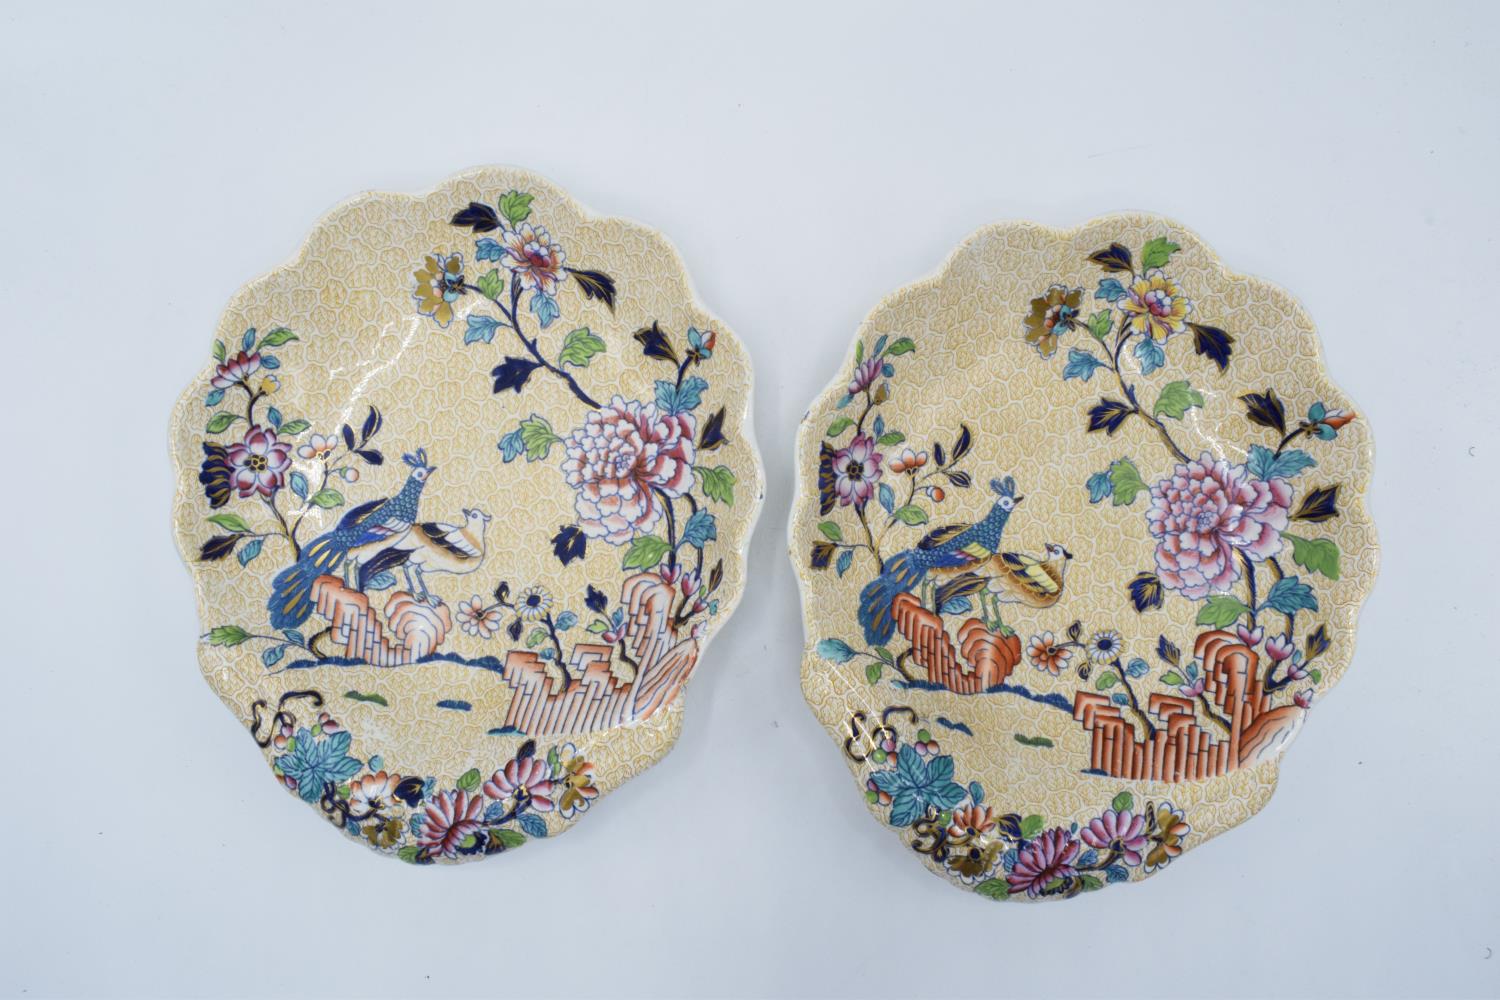 Spode pair of Peacock and Peony shell dishes (2). In good condition, light scratches and signs of